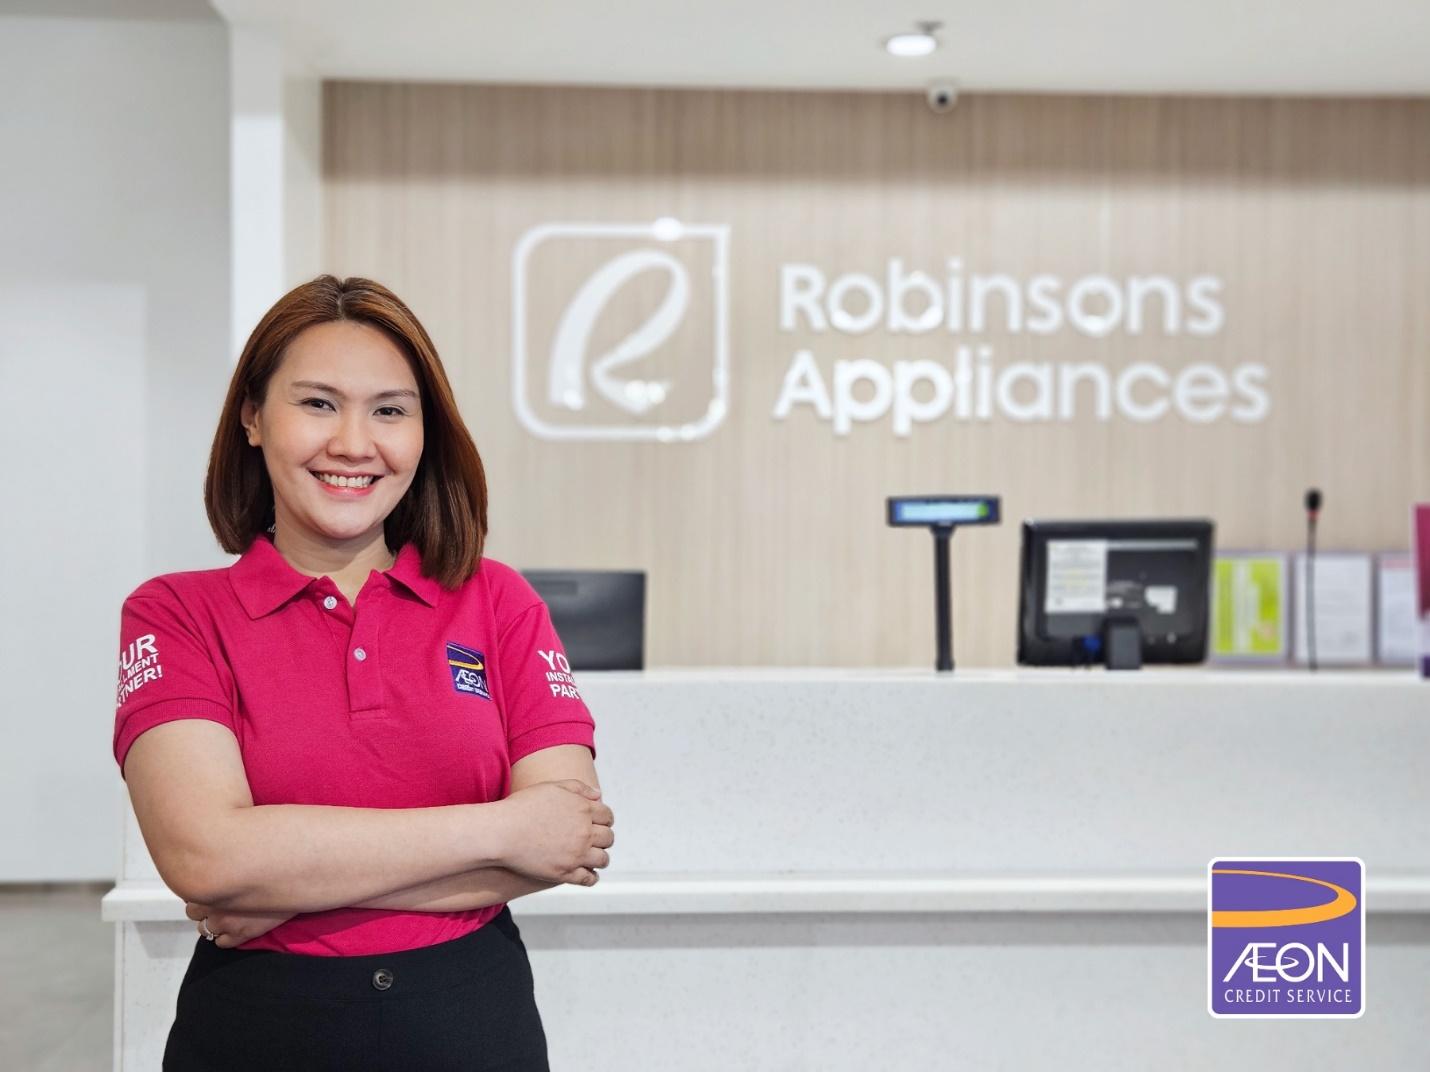 Robinsons Appliances race to a minute AEON credit